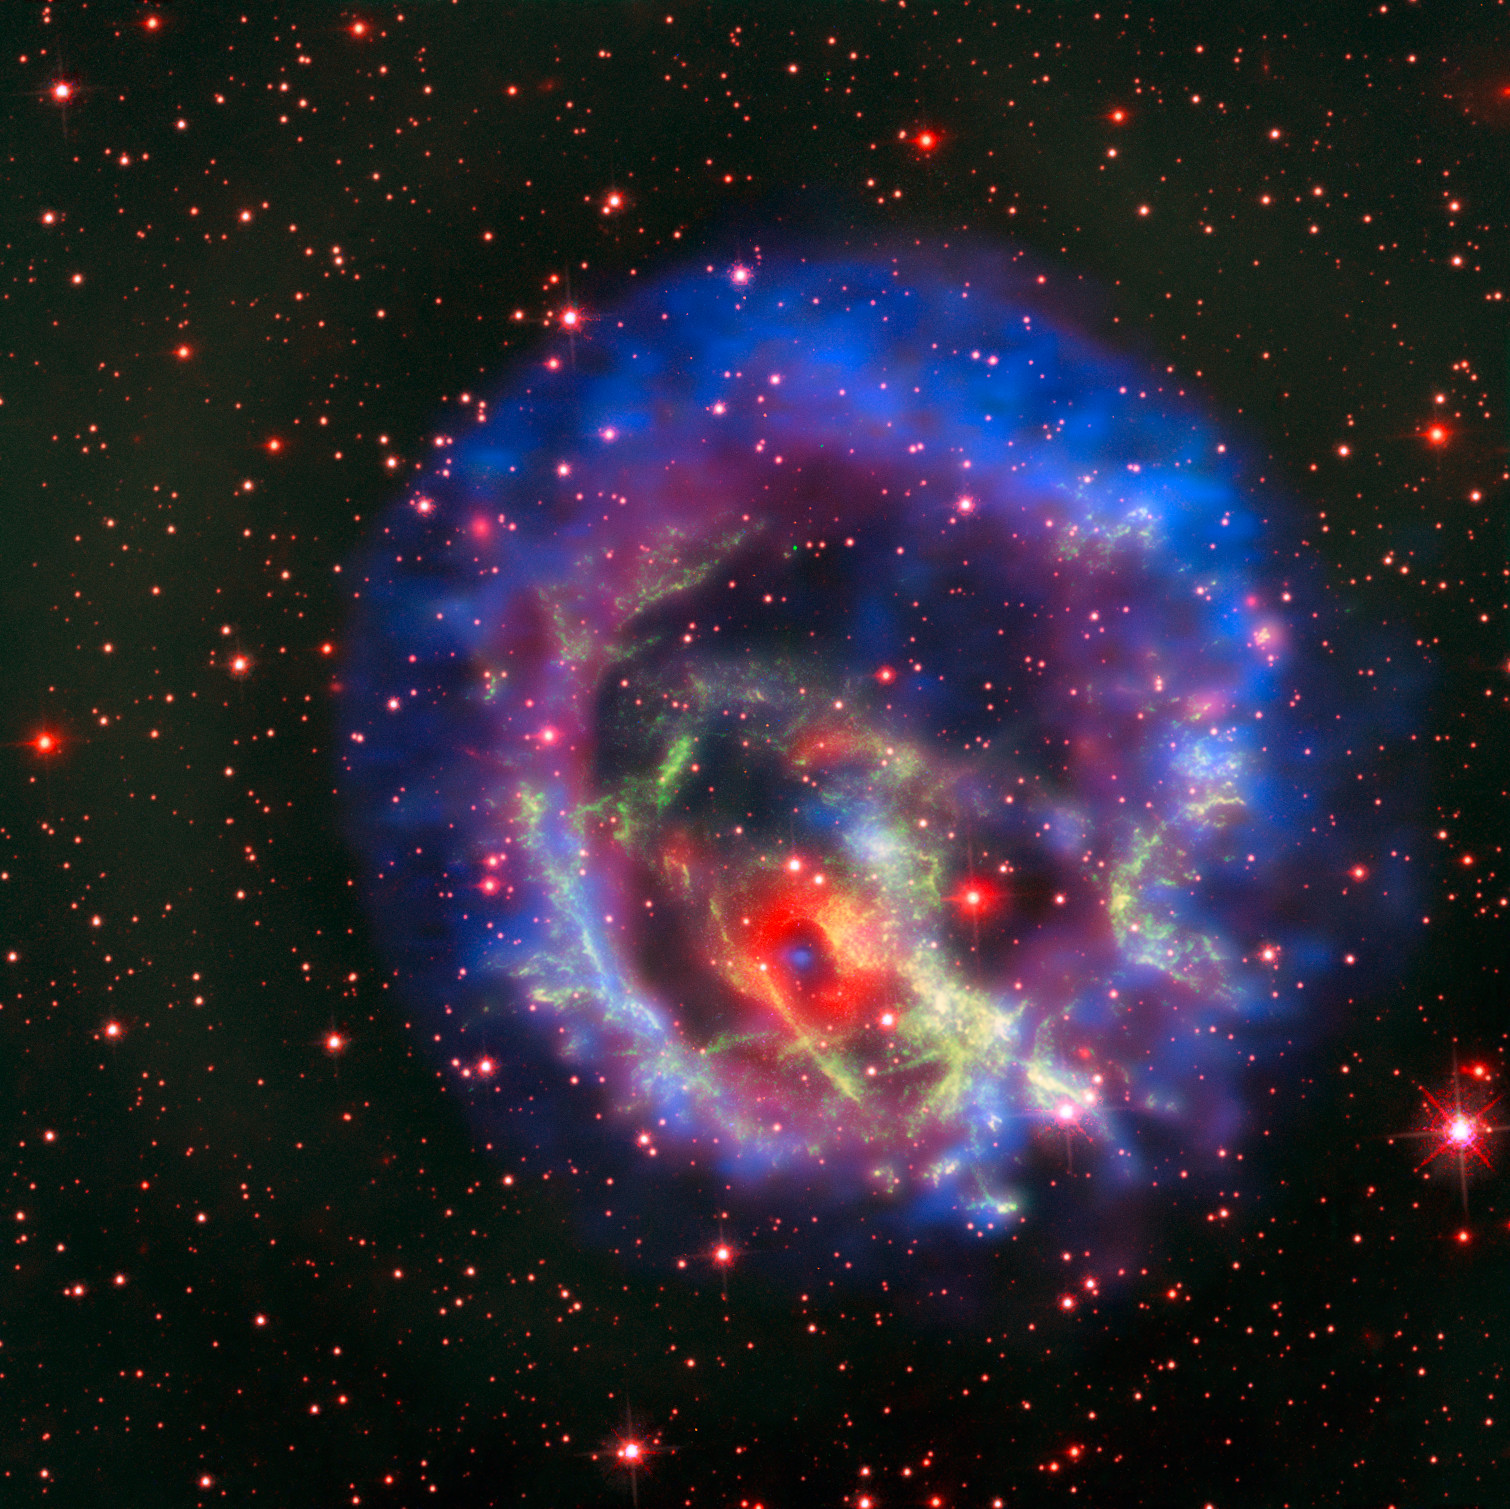 A neutron star appears as a blue spot surrounded by shells of material which appear as red and green rings